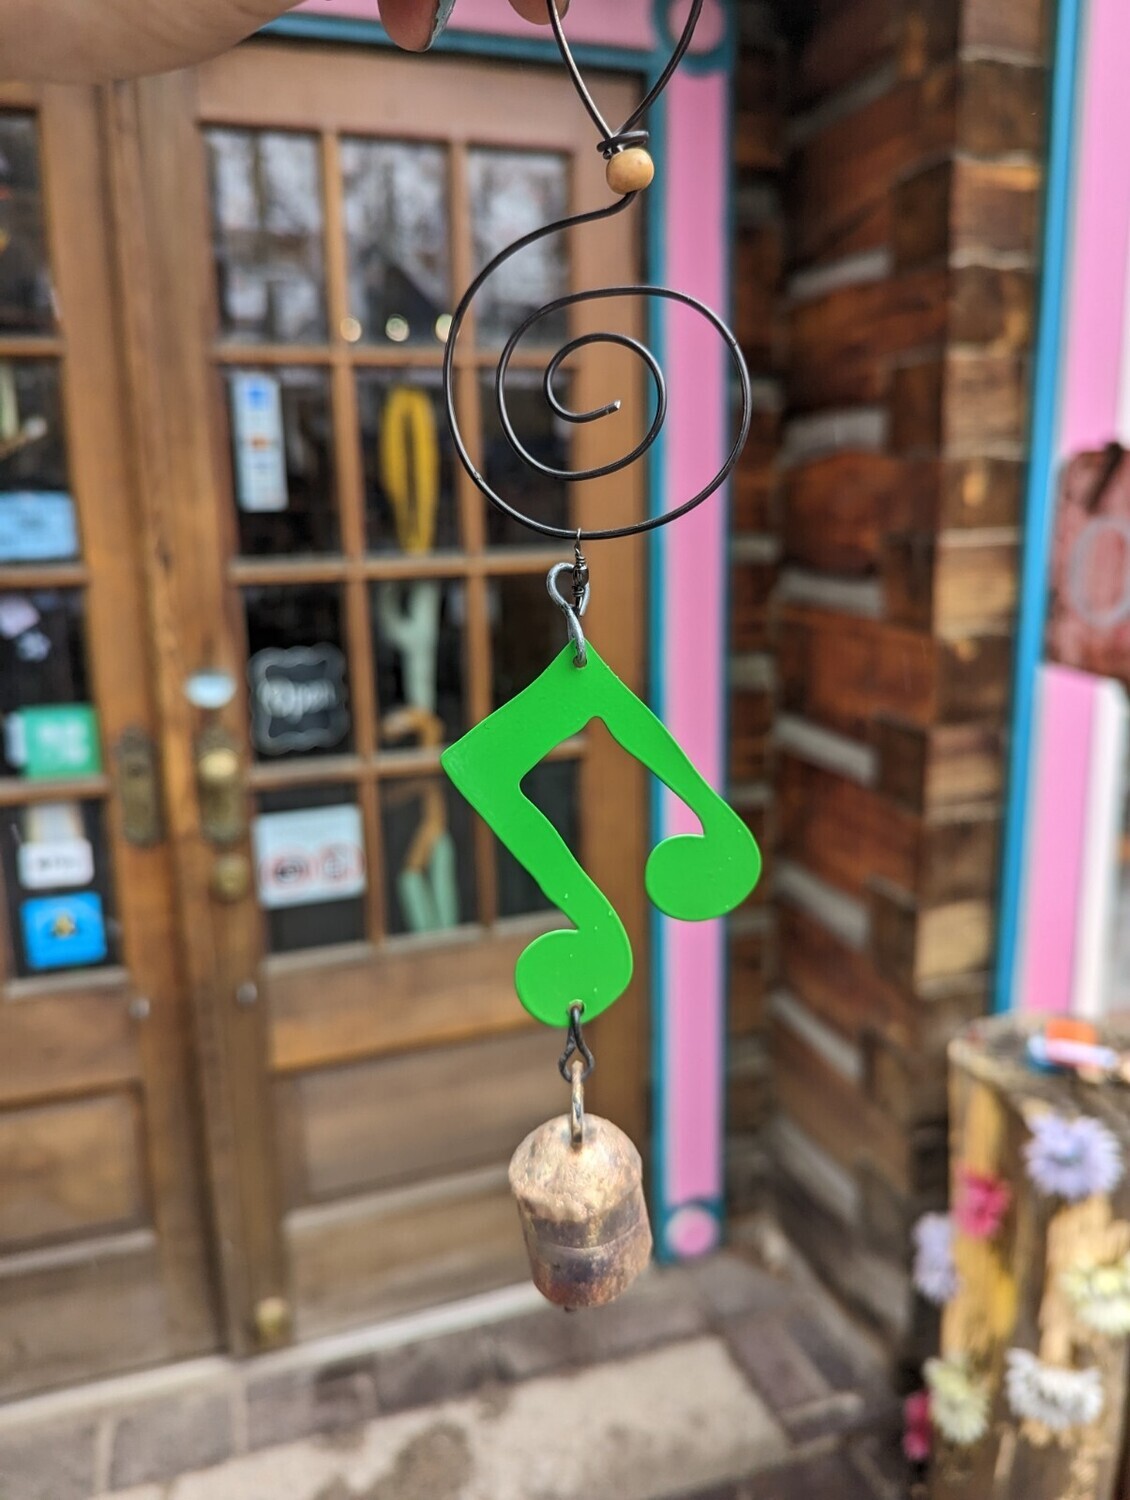 Small Wind Chime